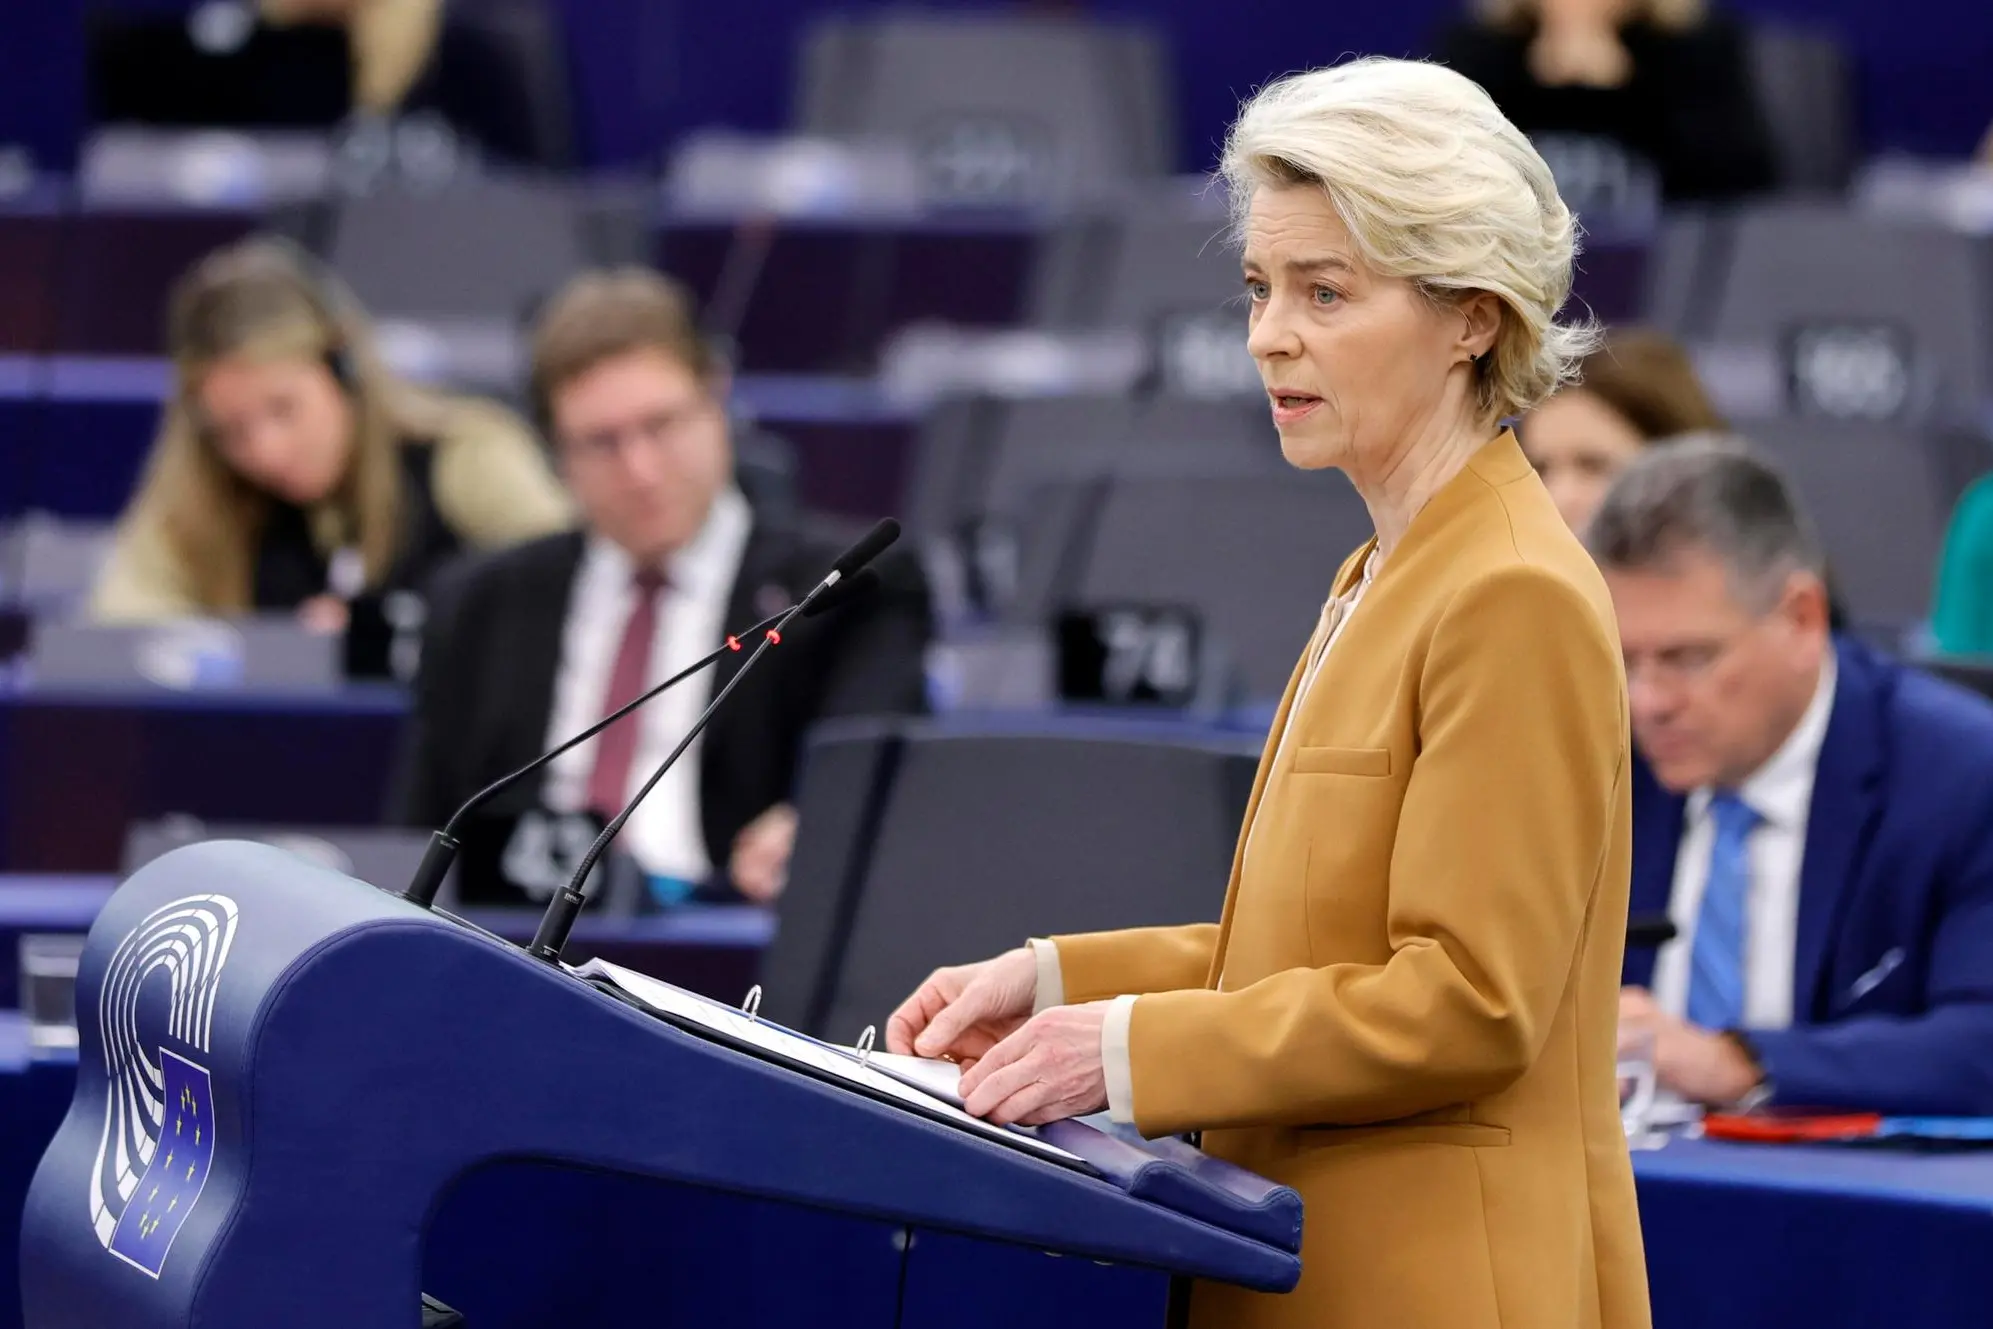 epa11130668 European Commission President, Ursula von der Leyen, speaks during a debate on 'Motions for resolutions - The need for unwavering EU support for Ukraine, after two years of Russia’s war of aggression against Ukraine' at the European Parliament in Strasbourg, France, 06 February 2024. The EU Parliament's session runs from 05 till 08 February 2024. EPA/RONALD WITTEK